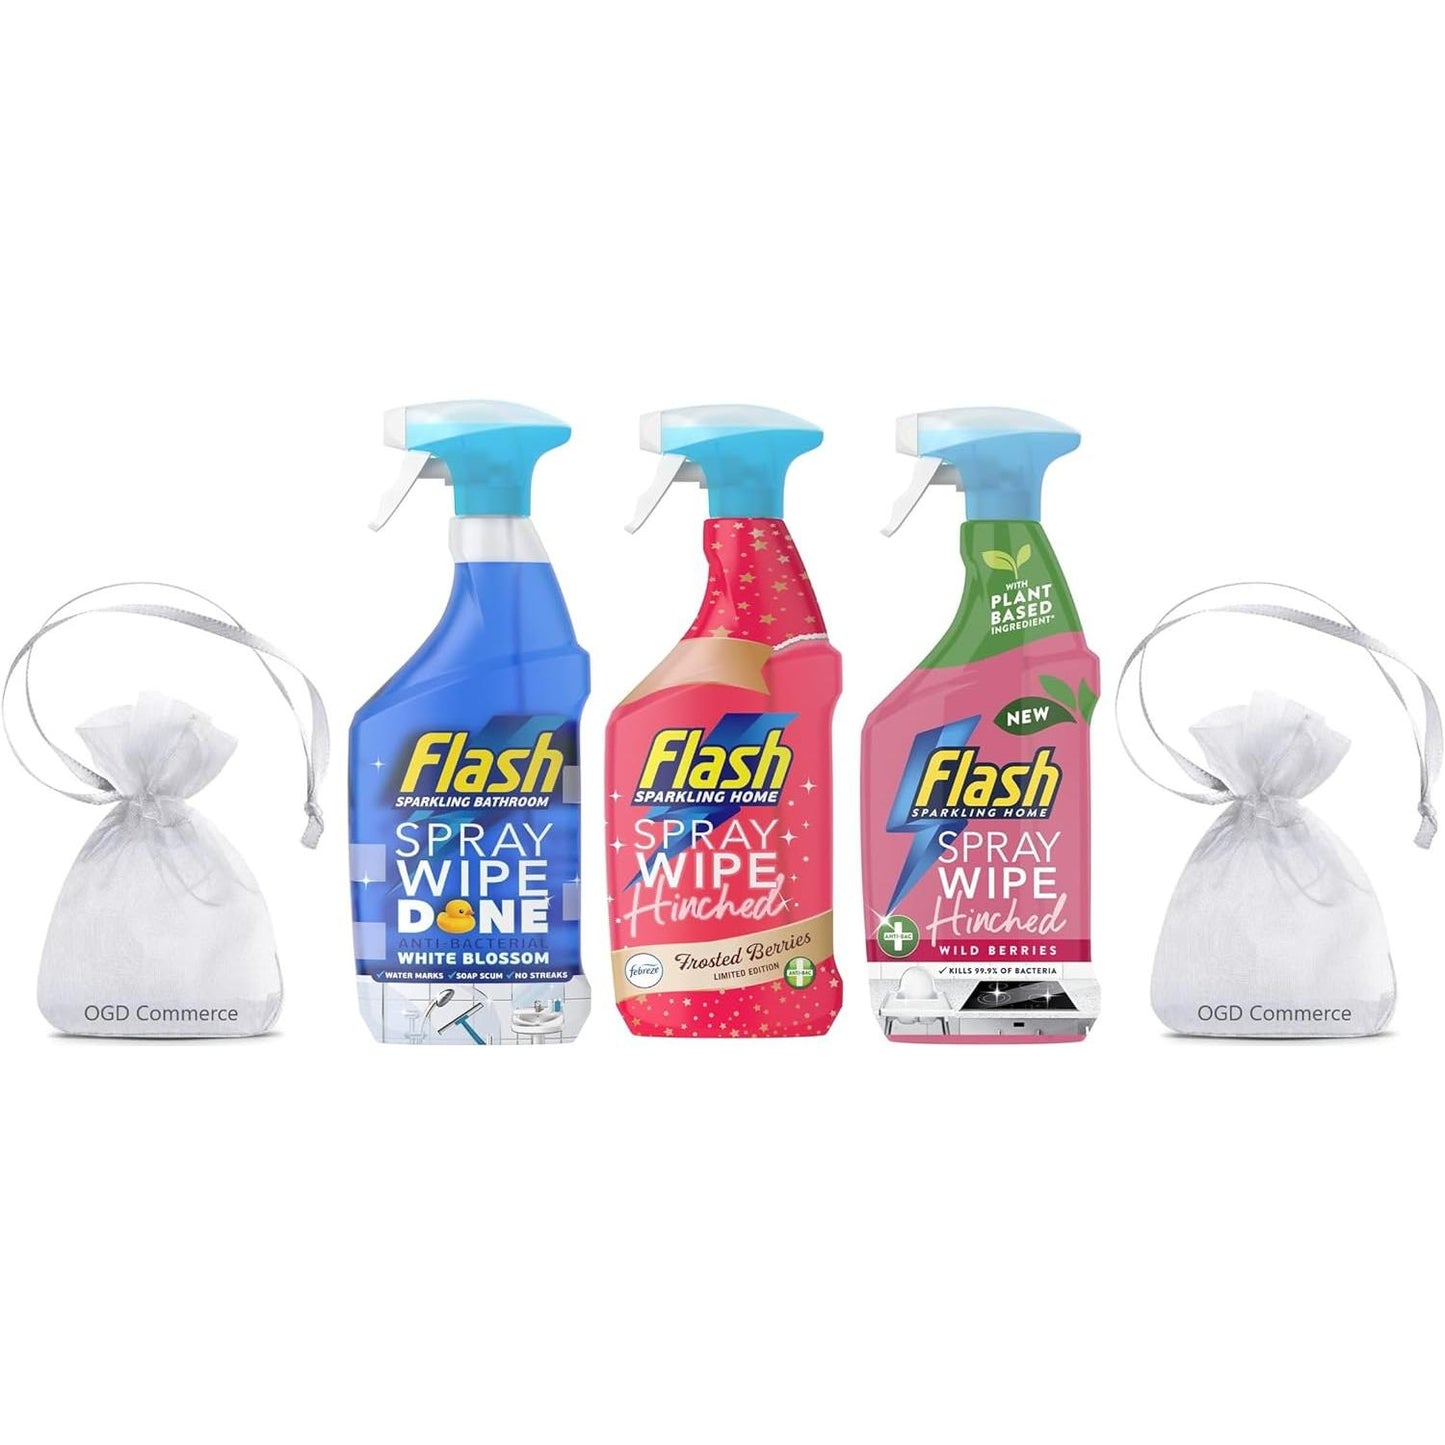 Flash cleaning Spray, 800ml, Pack of 3 MIx scent